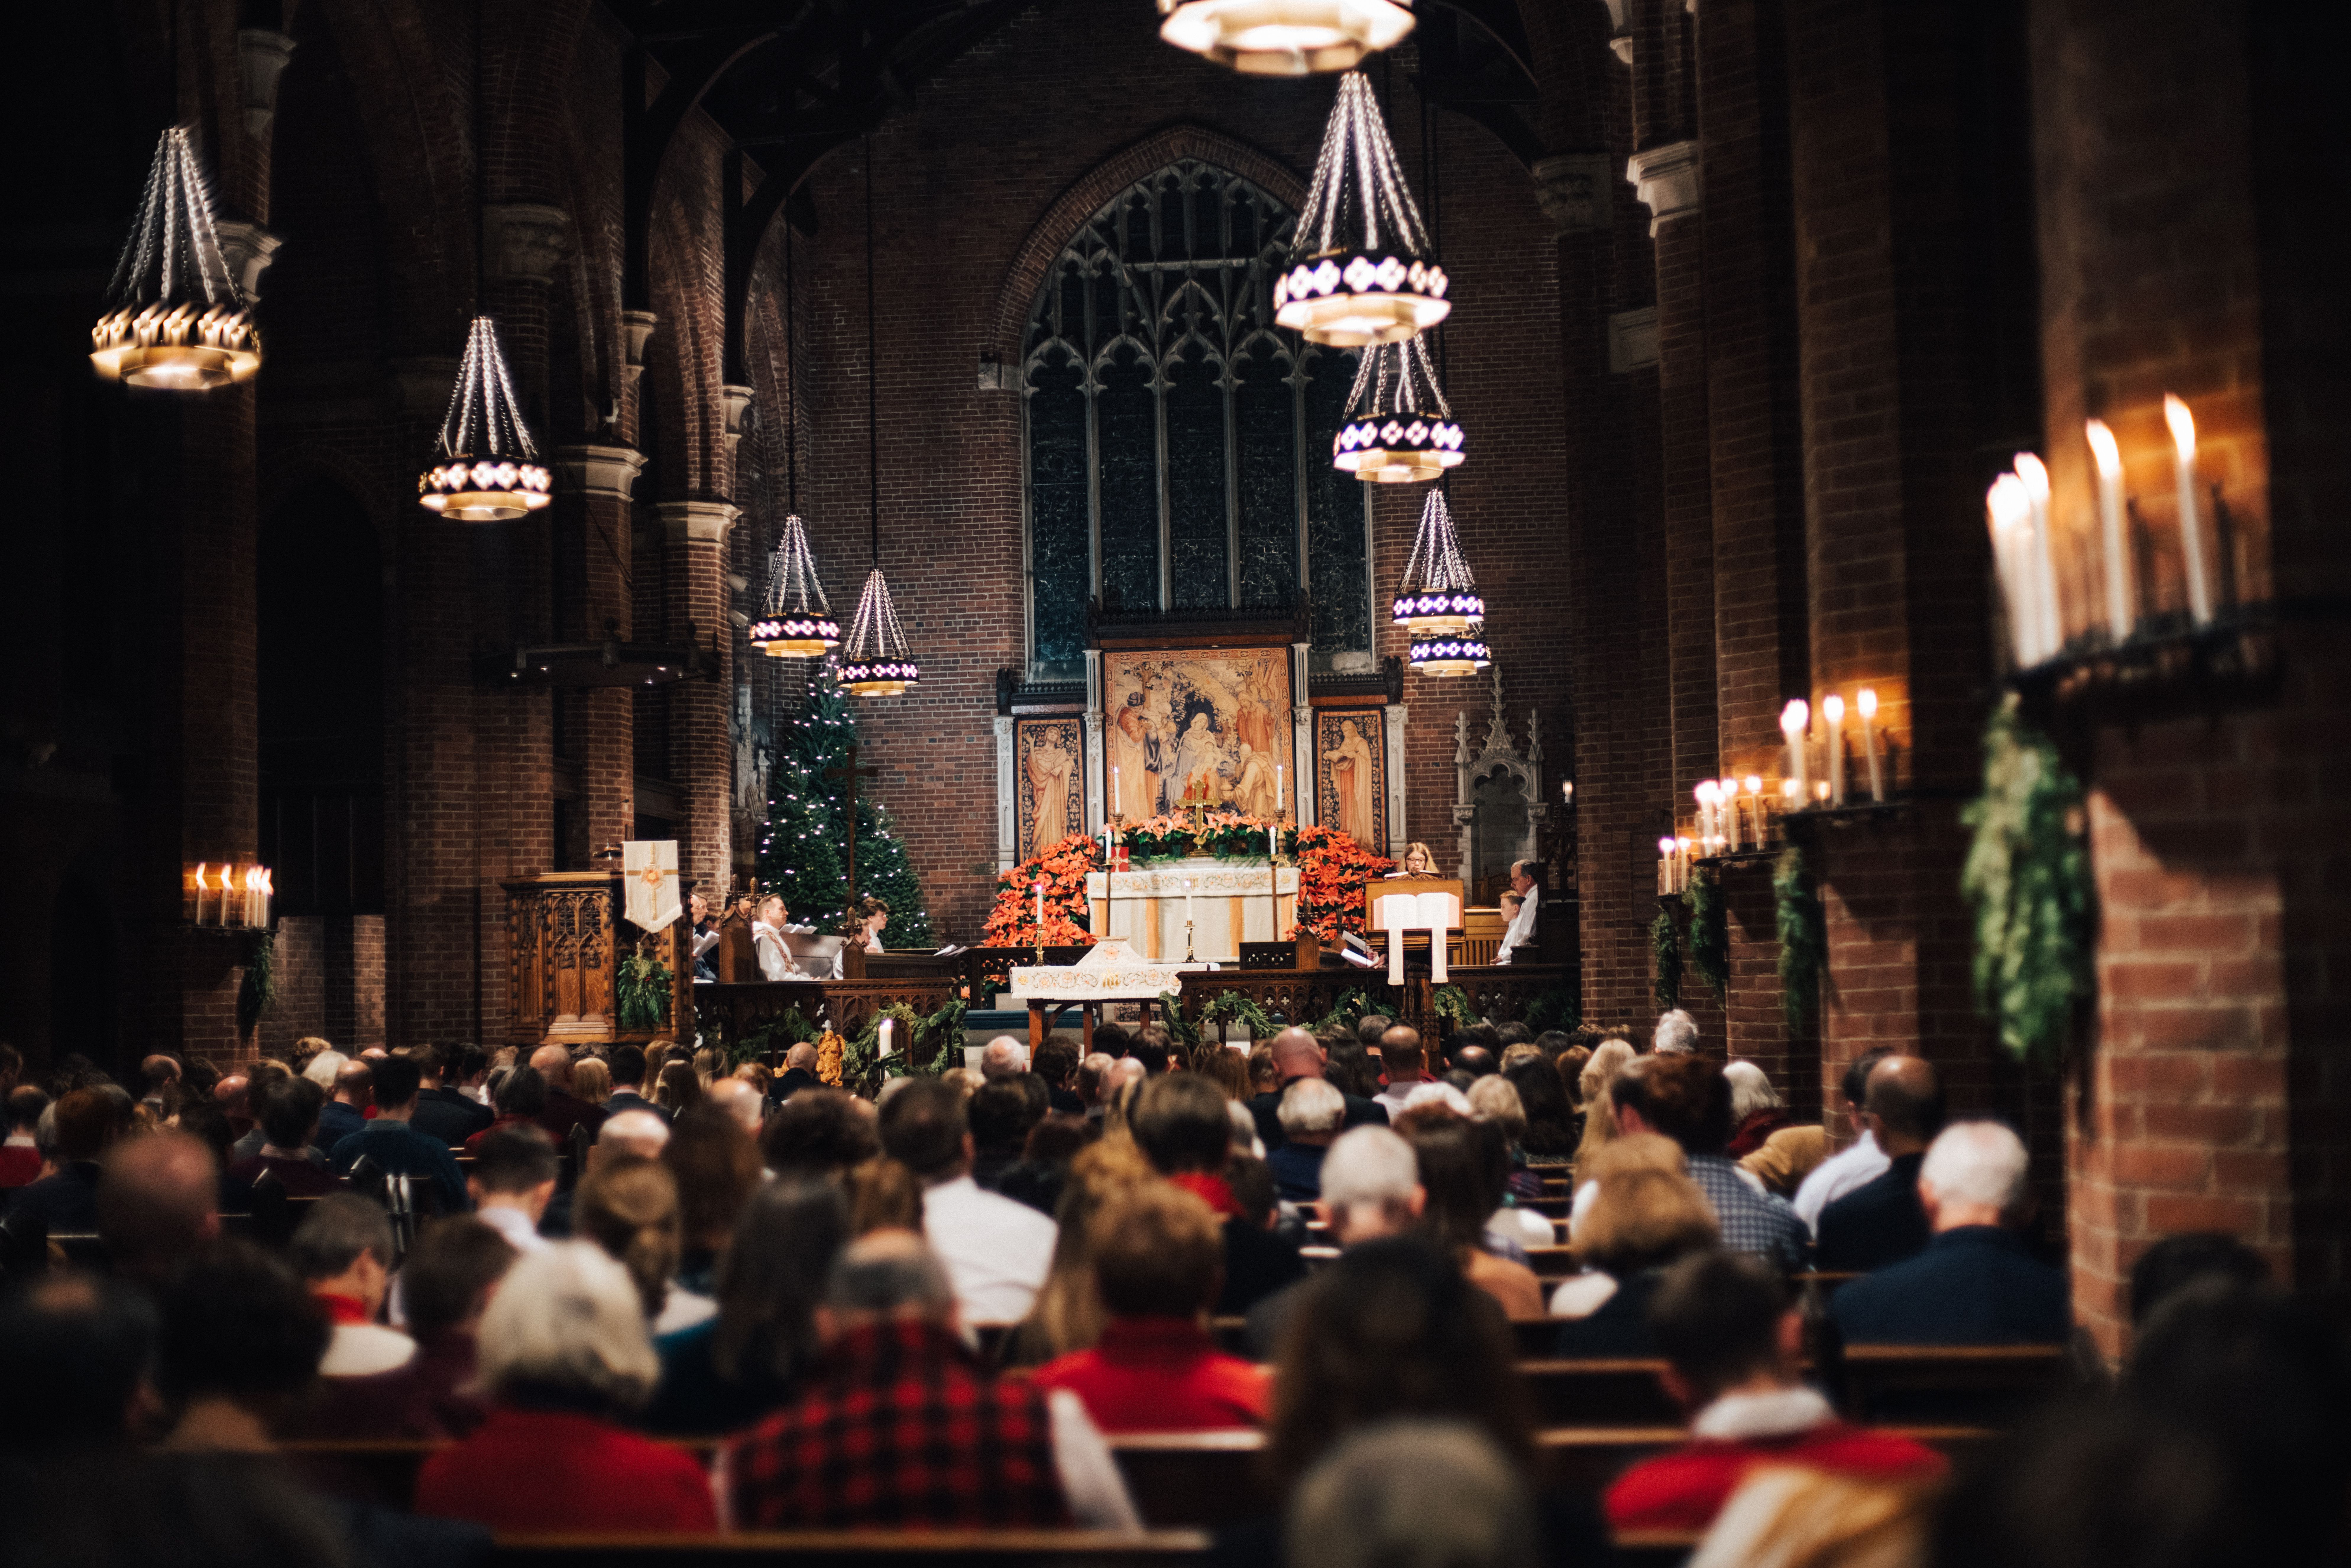 Parish of the Epiphany's sanctuary filled with people at Christmastime